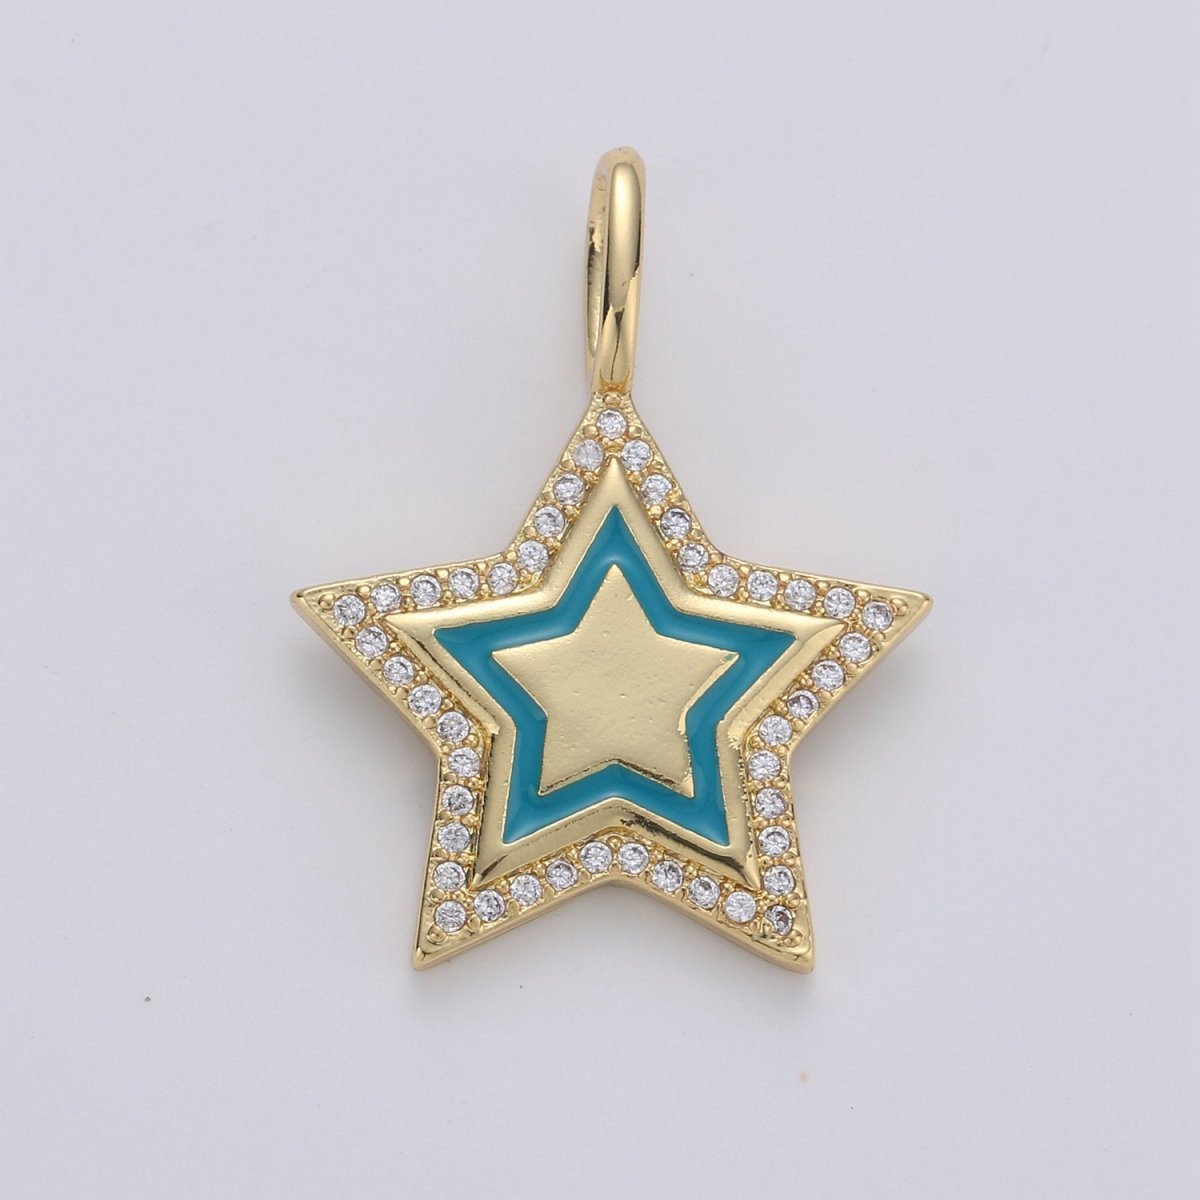 Dainty Micro Pave Star Charm 14K Gold Filled Star Pendant Enamel Star Charm for Bracelet, Necklace, Earring Component D-107 TO D-109 - DLUXCA